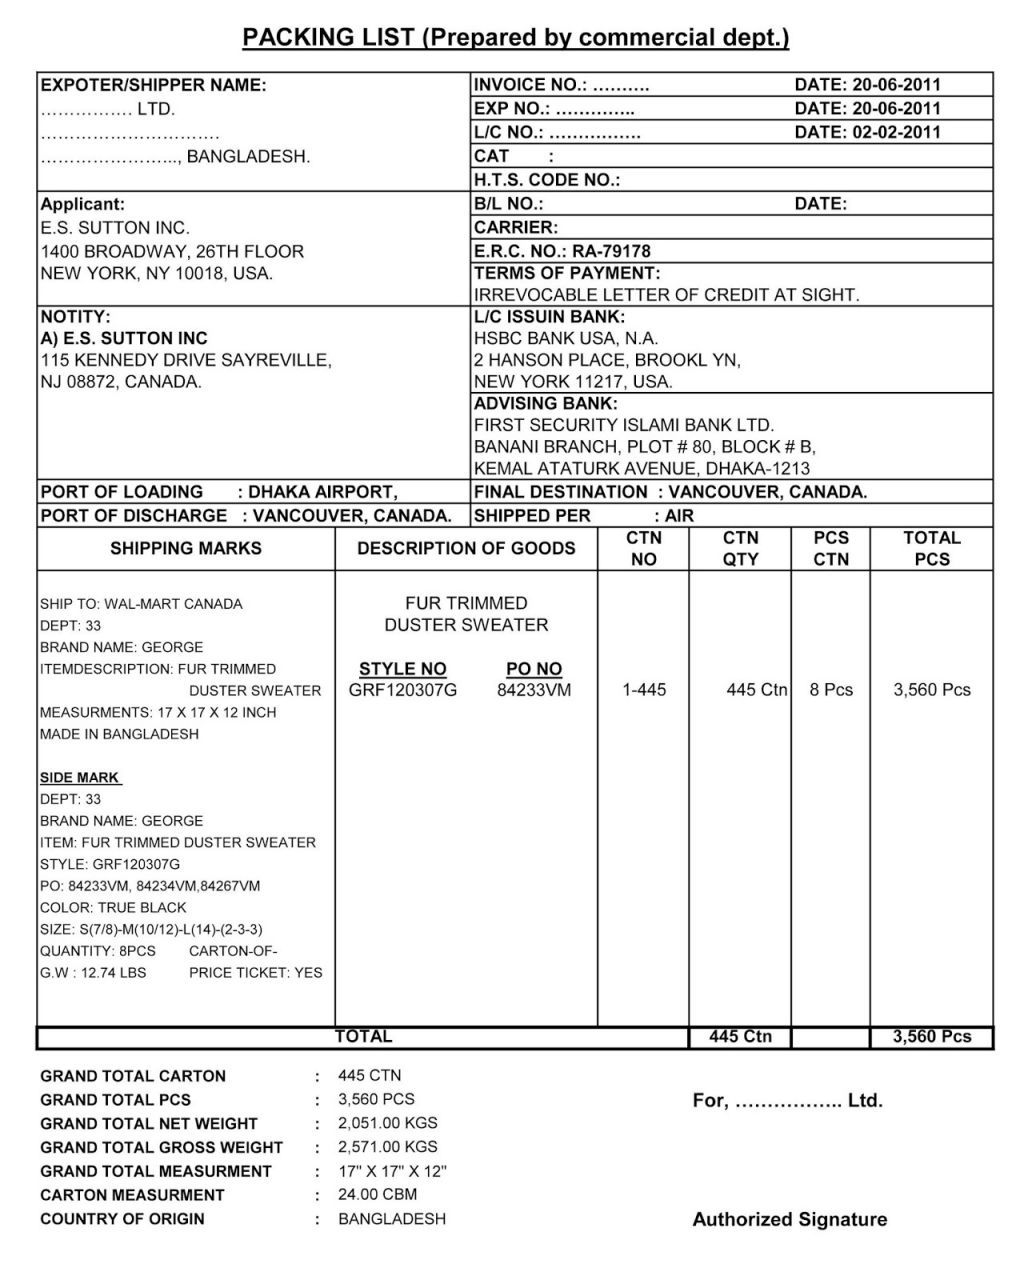 commercial invoice import template